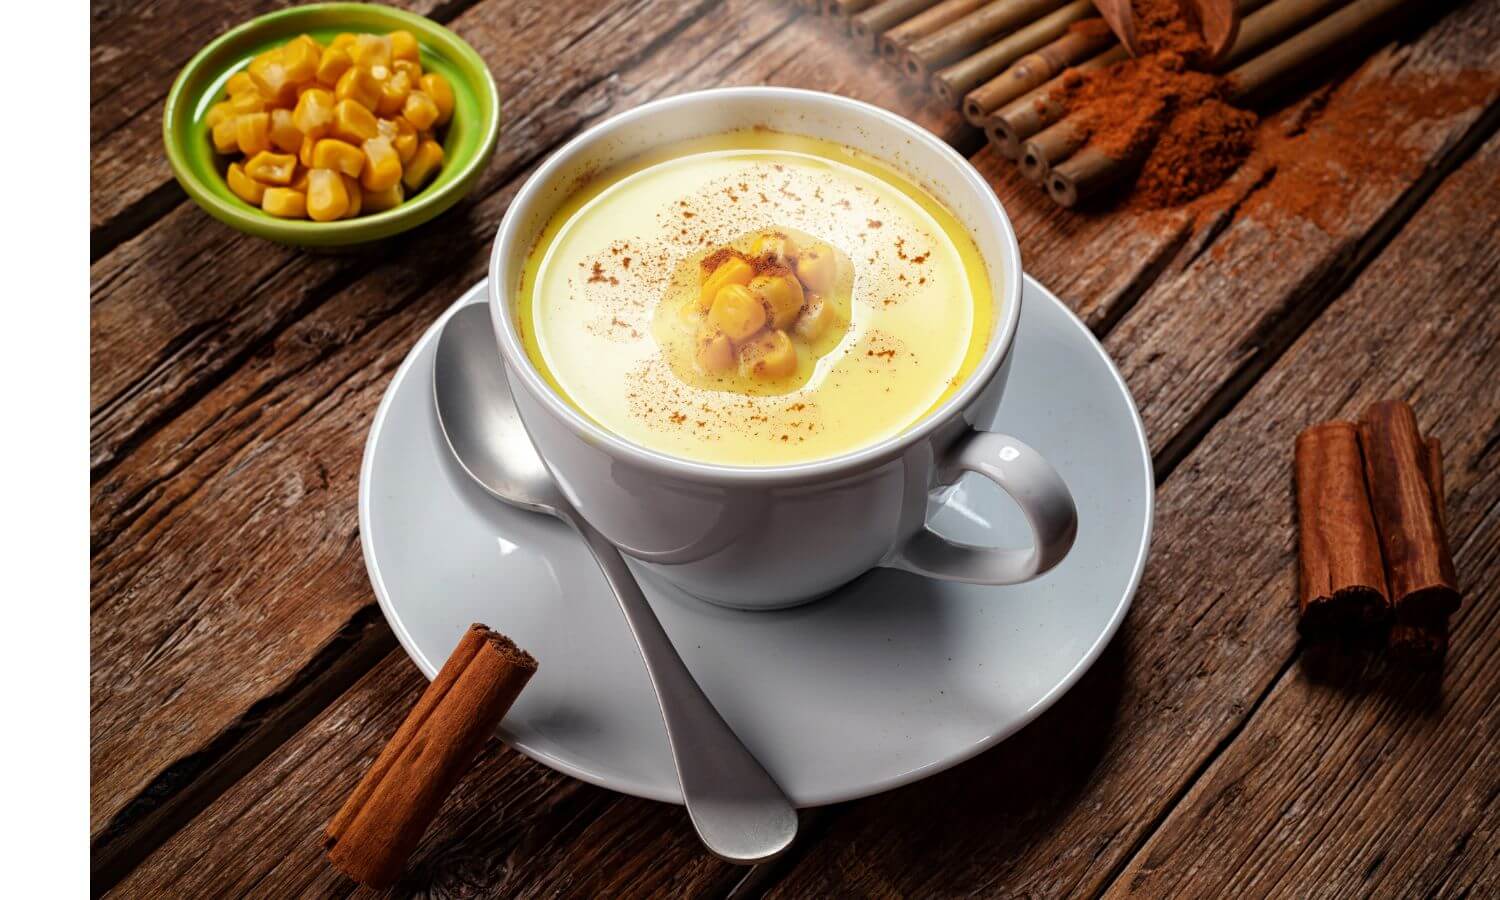 Atole, the traditional Mexican hot drink made from corn dough.